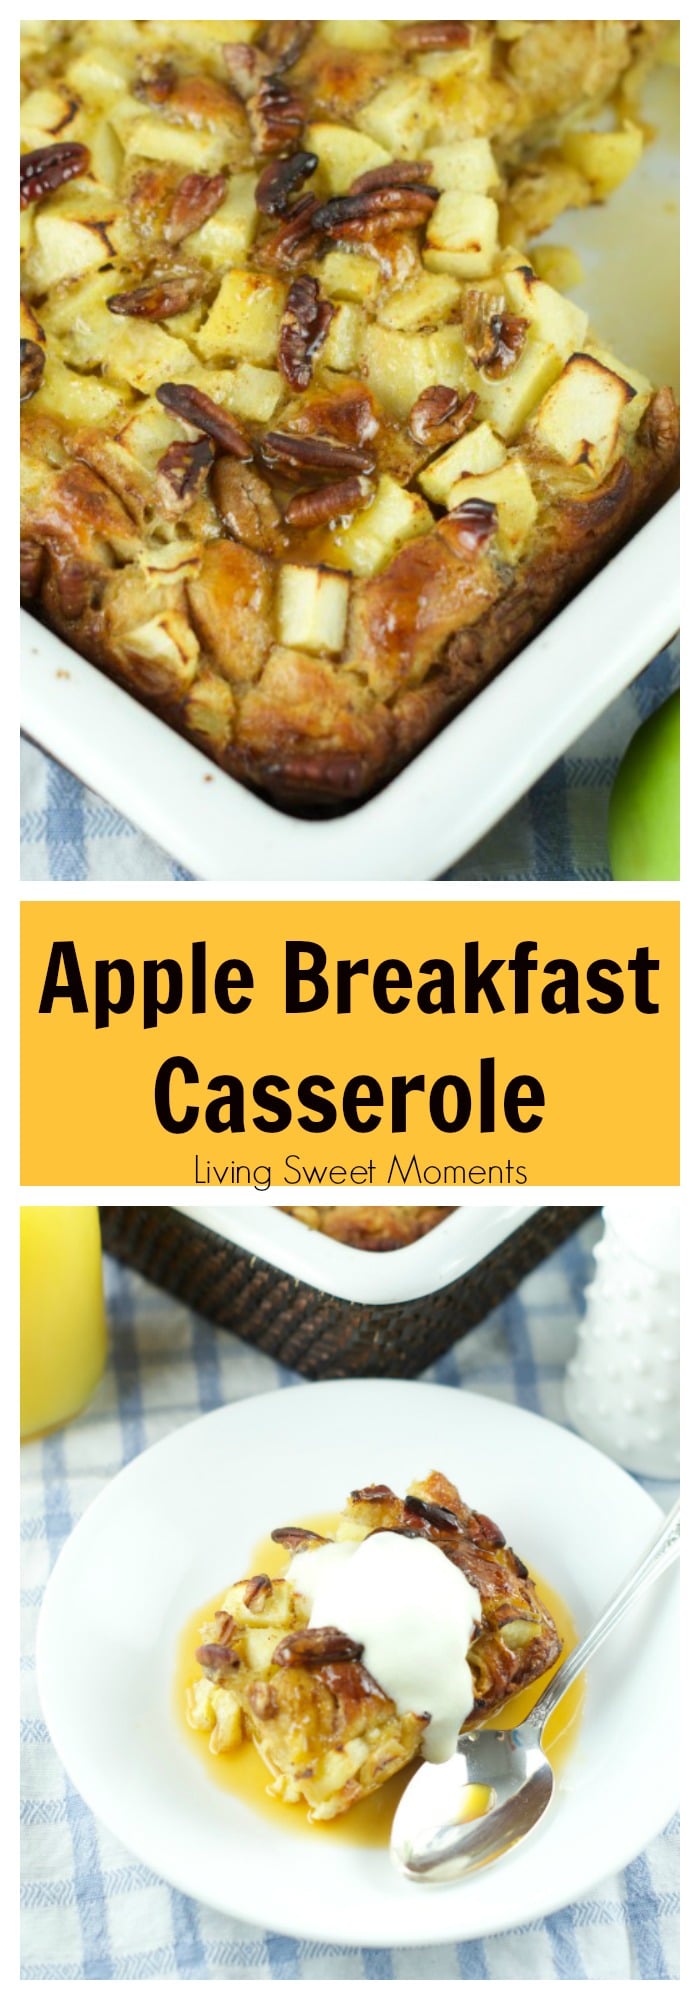 This delicious Cinnamon Apple bake with Orange Maple Glaze recipe is made with refrigerated cinnamon rolls. The perfect easy breakfast or brunch idea!